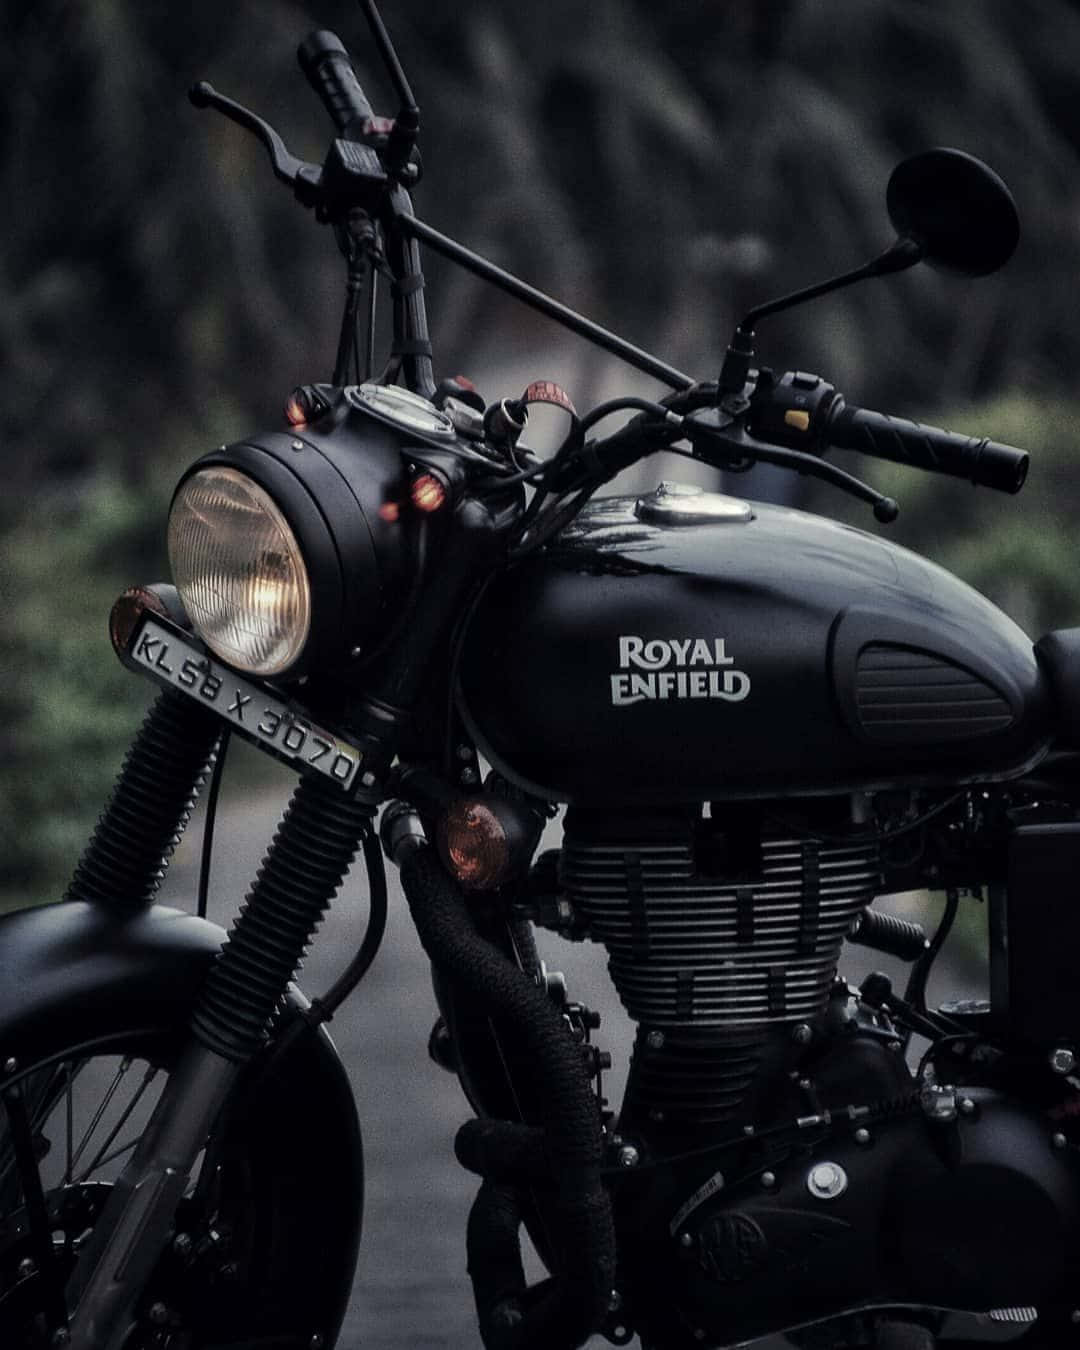 A Black Motorcycle With The Royal Emblem Parked On The Road